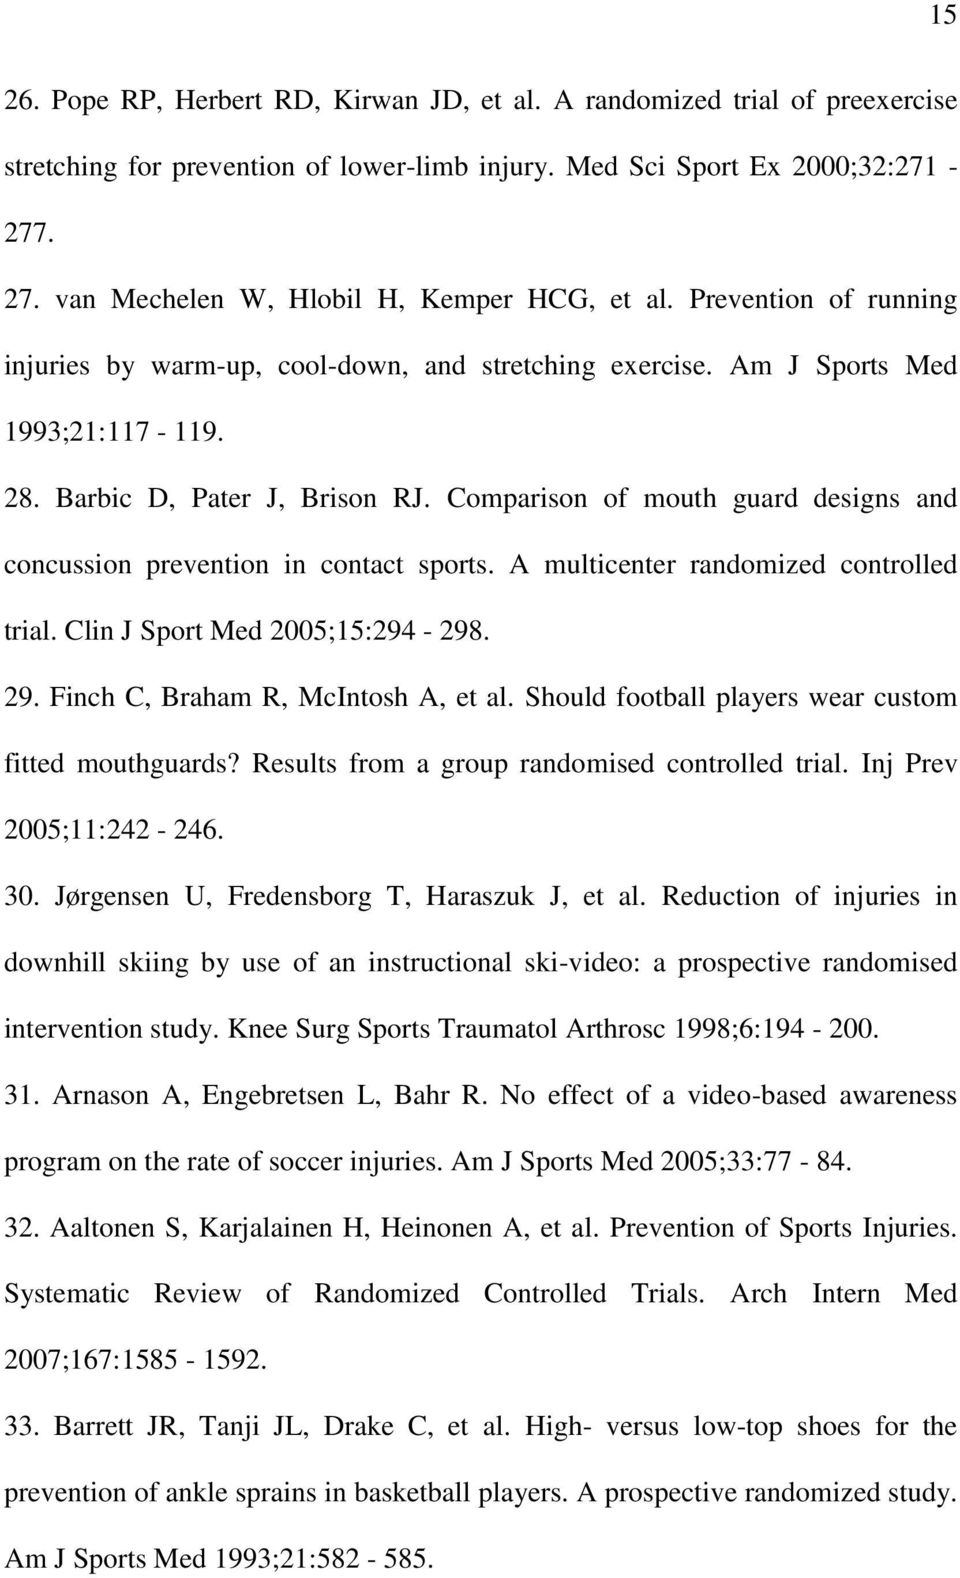 Comparison of mouth guard designs and concussion prevention in contact sports. A multicenter randomized controlled trial. Clin J Sport Med 2005;15:294-298. 29. Finch C, Braham R, McIntosh A, et al.